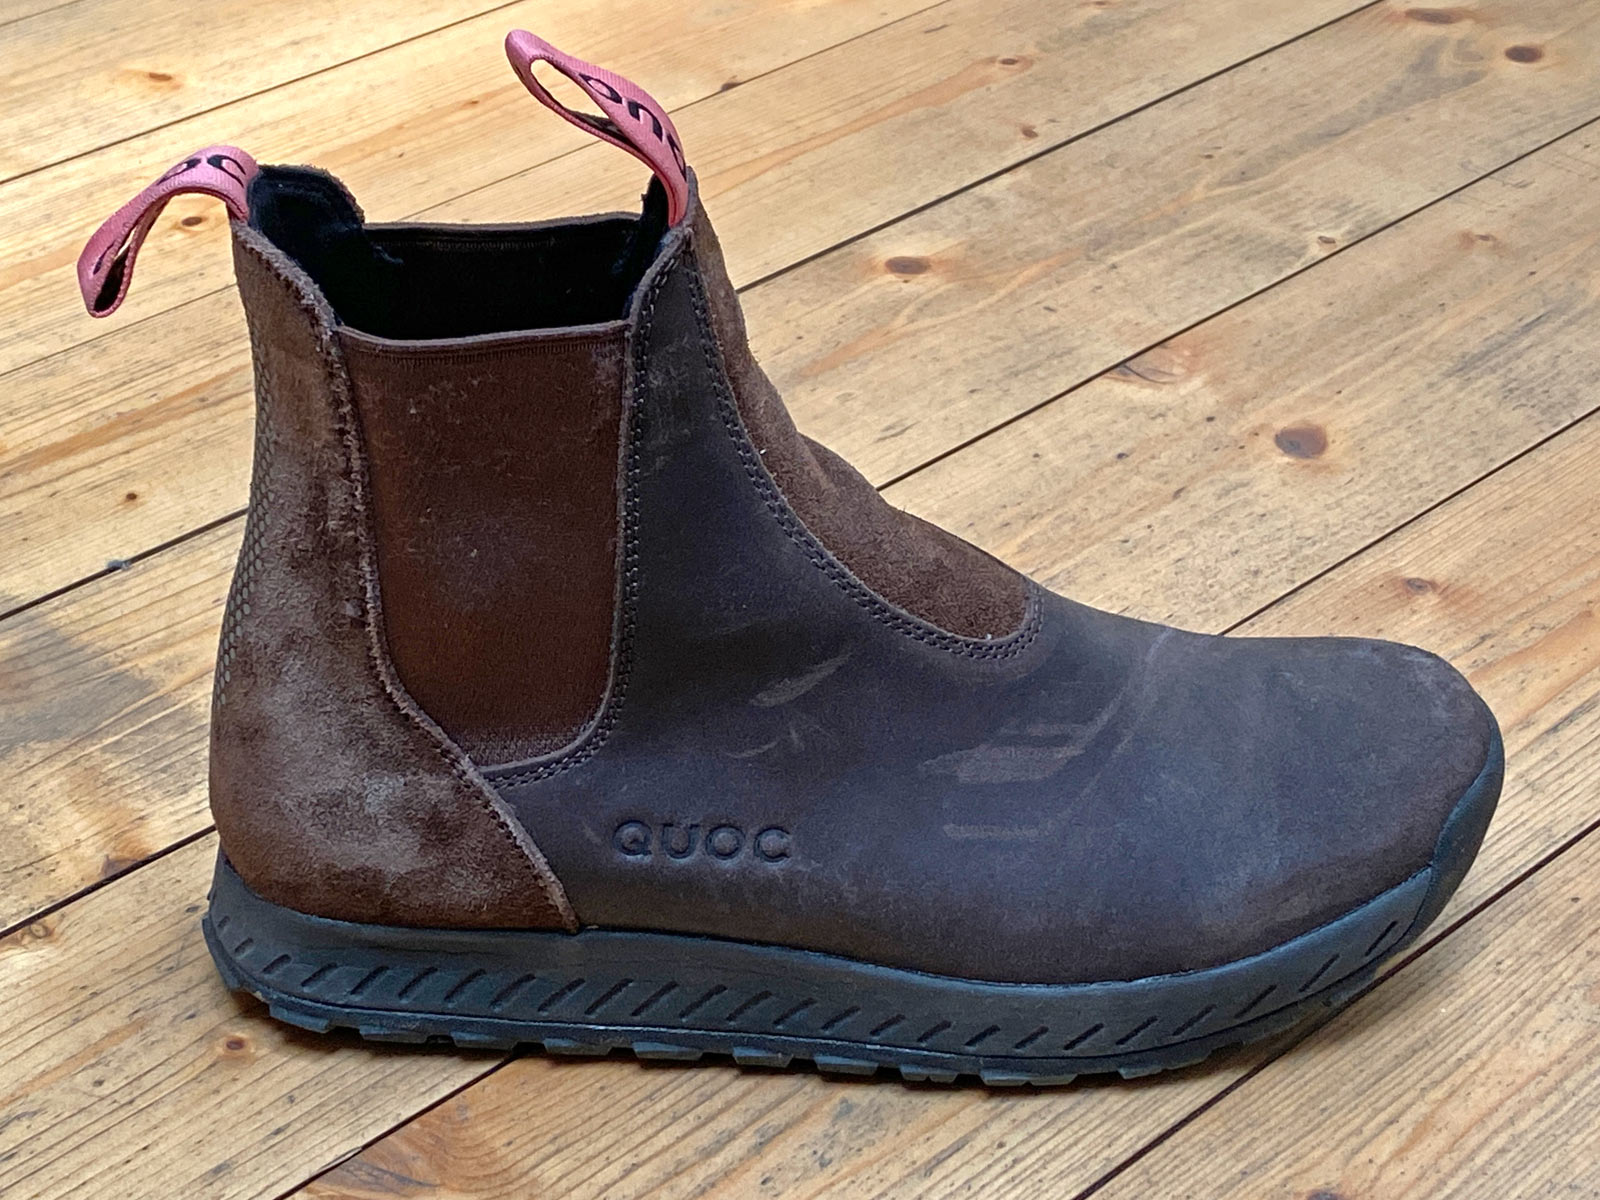 Quoc Chelsea Boot, slip-on casual clipless cycling shoes, waxed & suede leather